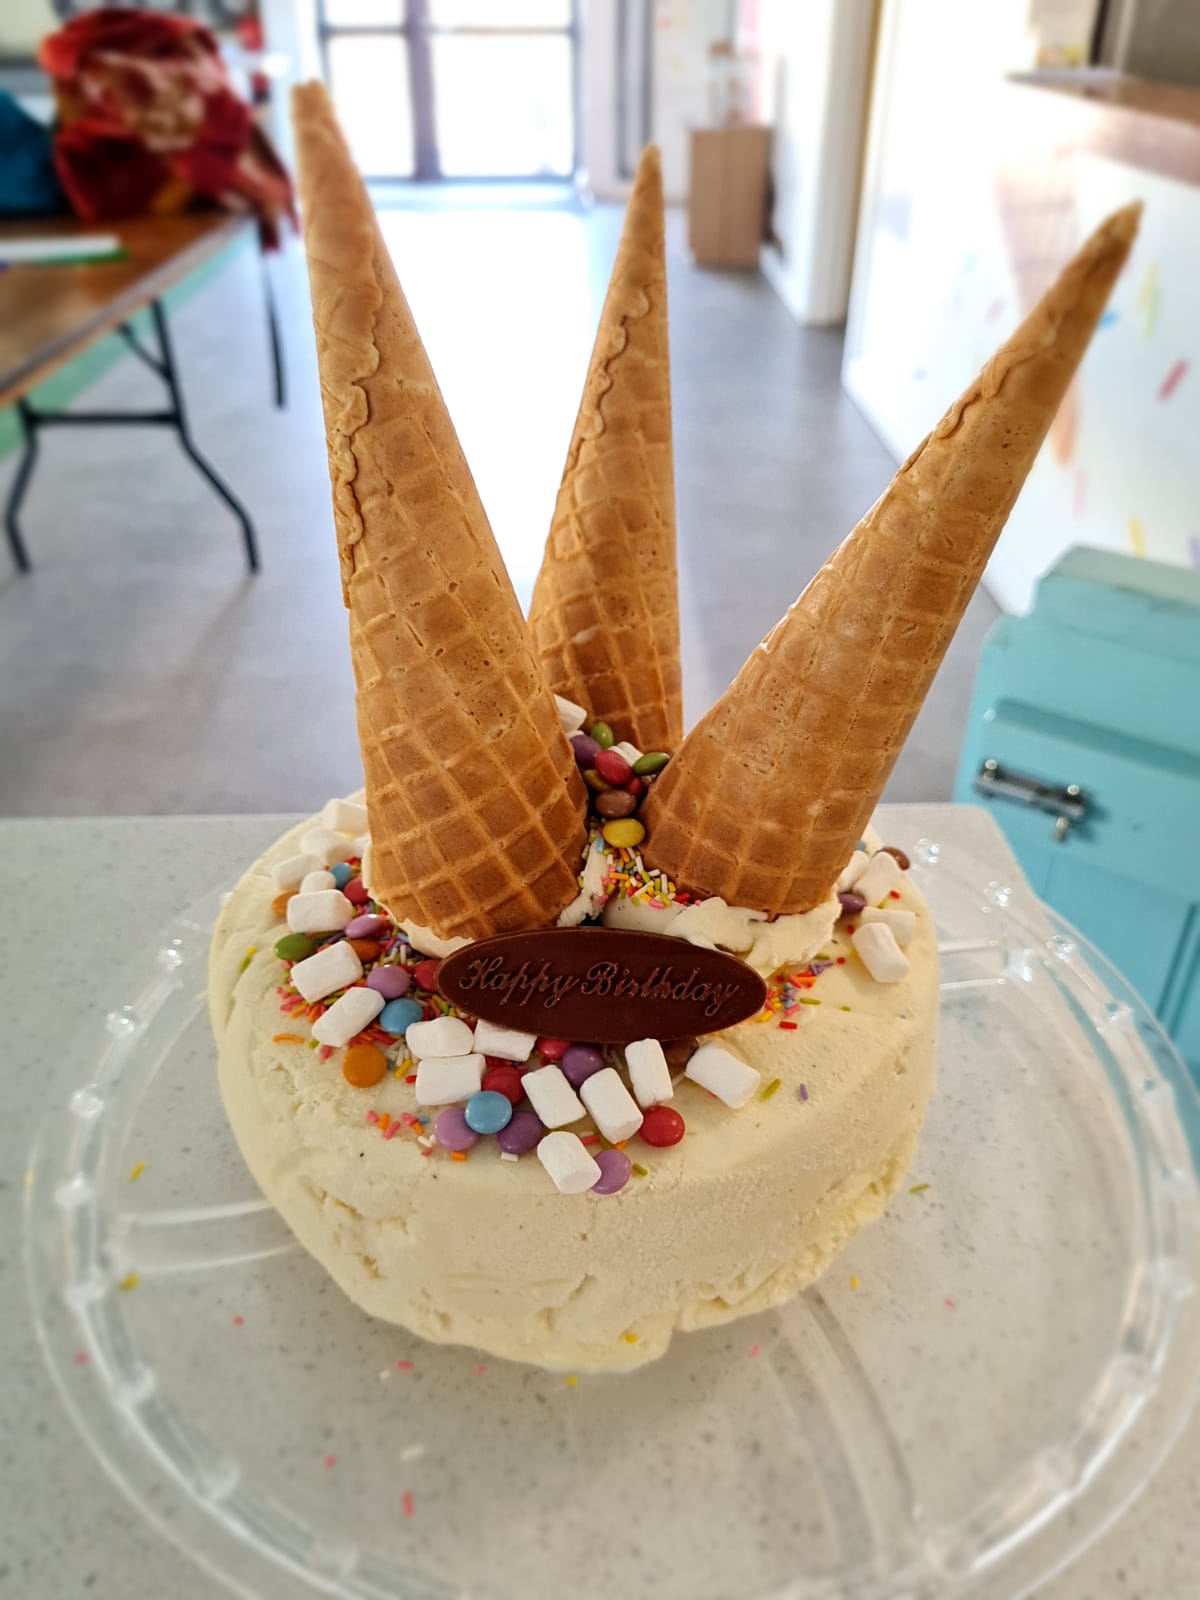 Ice Cream birthday cake Large - Welcome to Leahy's Open Farm - Midleton, Co  Cork